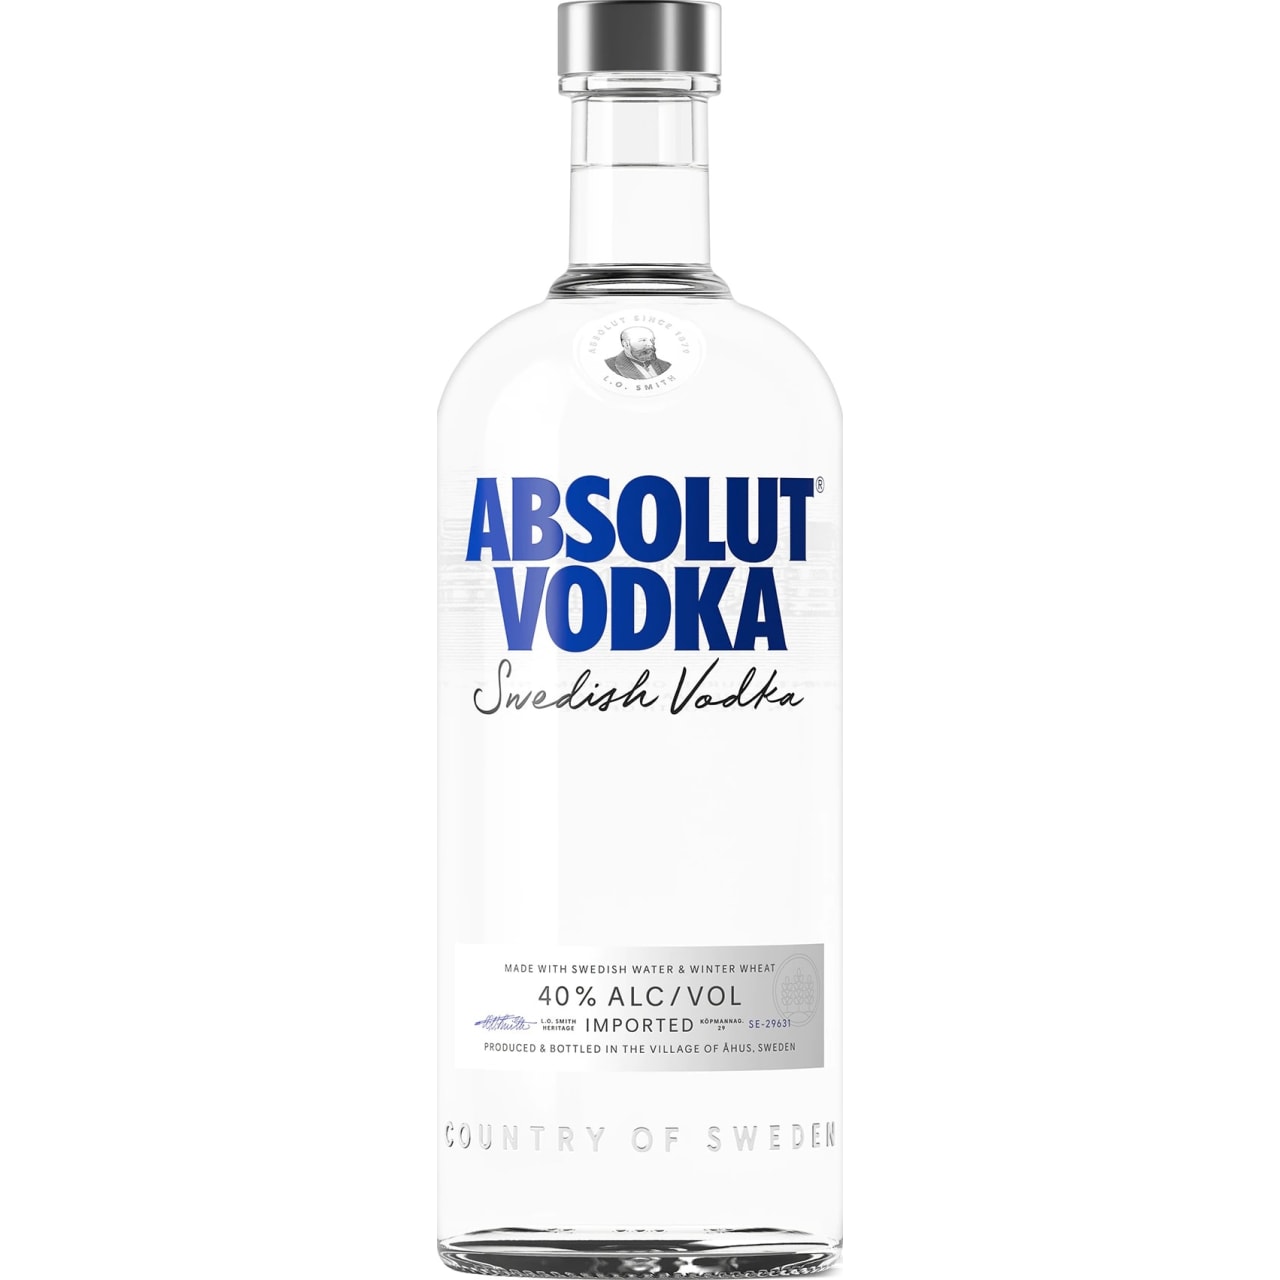 Absolut Original Vodka is made with wheat from Åhus, Sweden, giving it its smooth and mellow body with a distinct character of grain, followed by a hint of dried fruit.